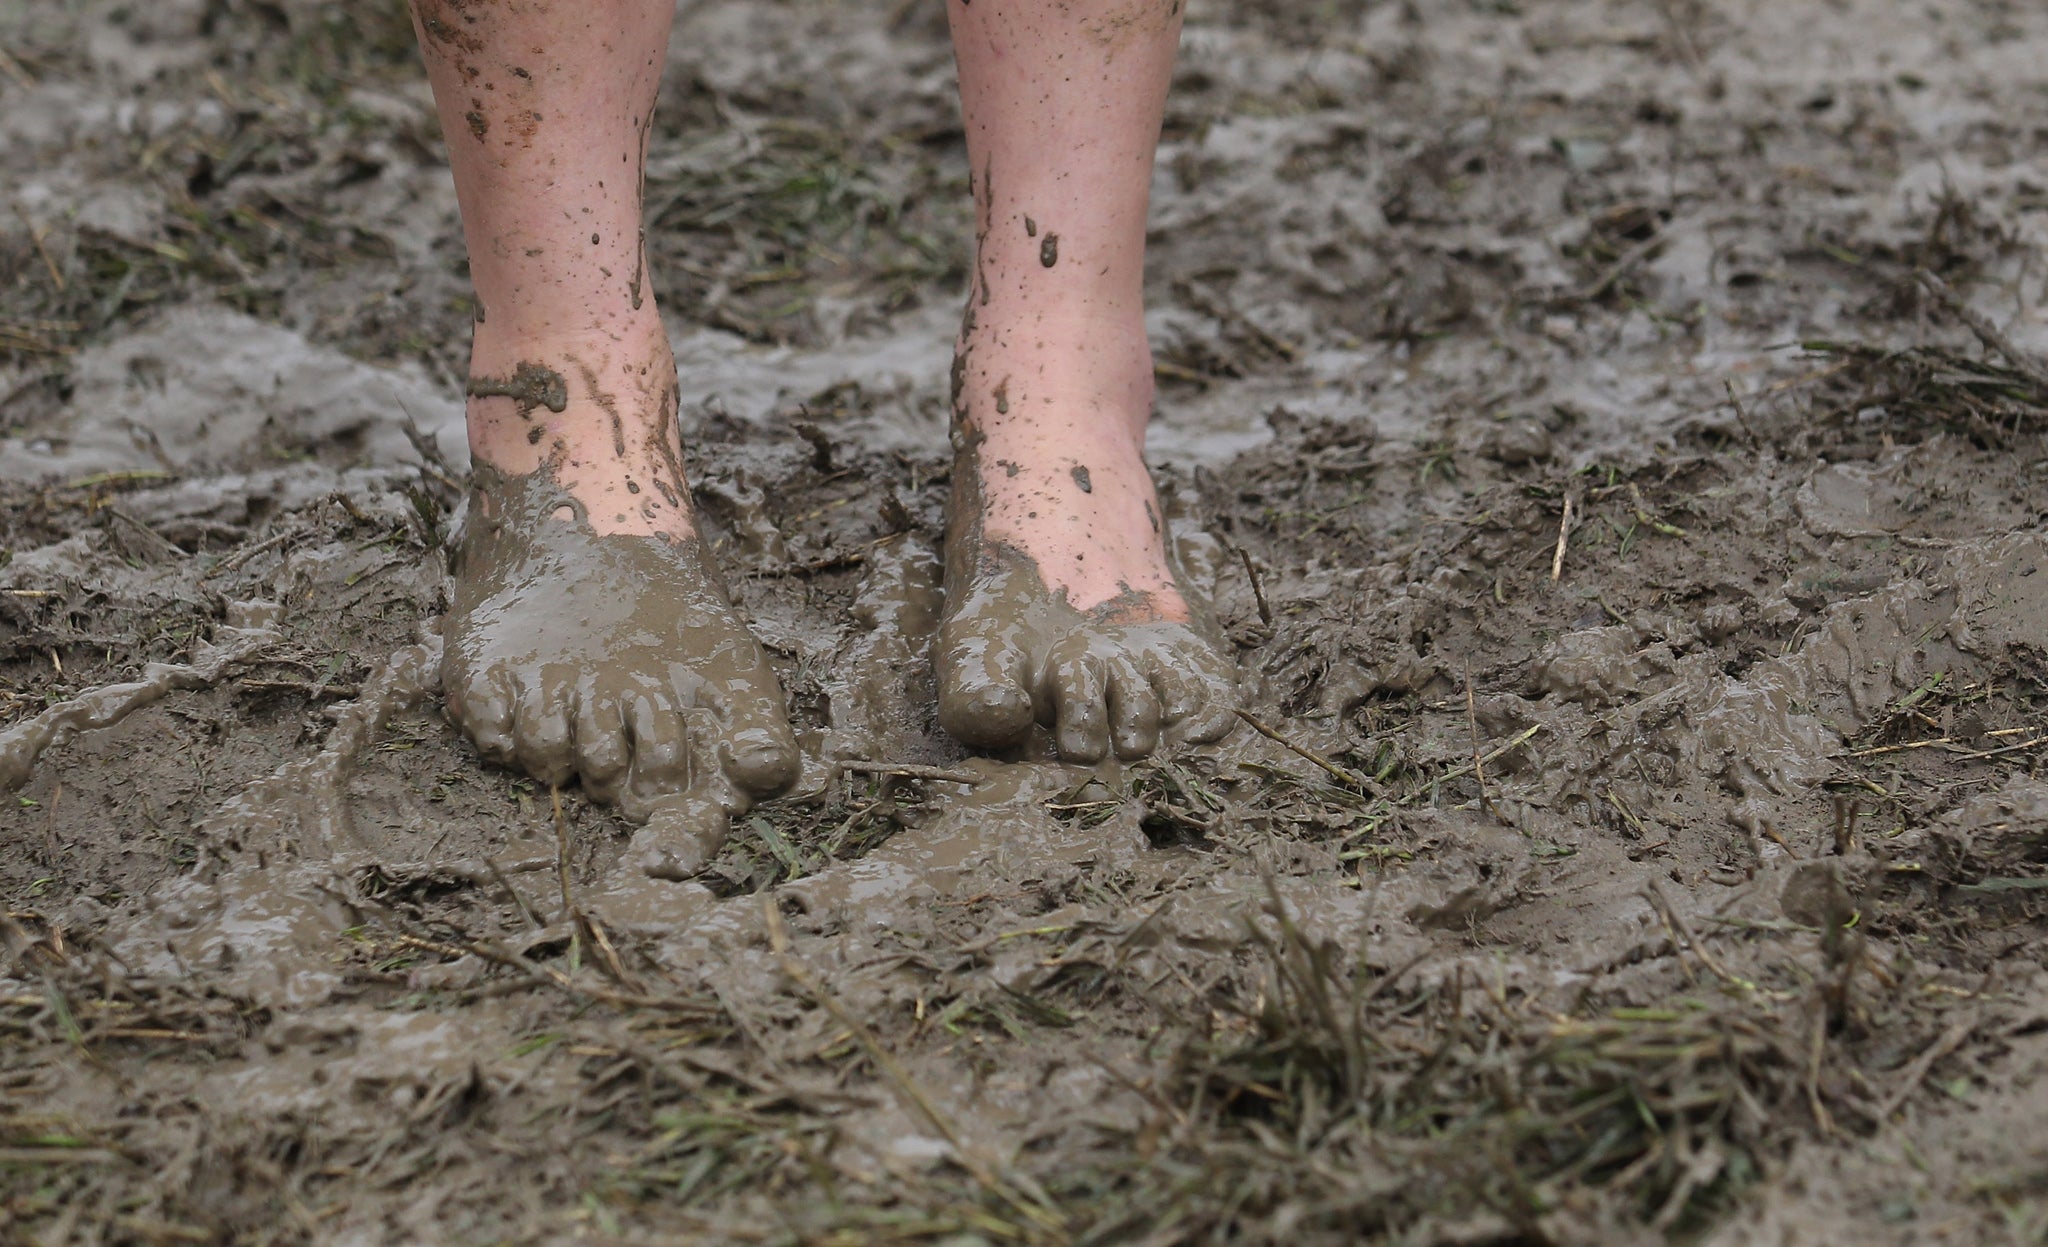 A festival attendee braves the mud as she arrives at the Glastonbury Festival site at Worthy Farm, Pilton on June 22, 2011